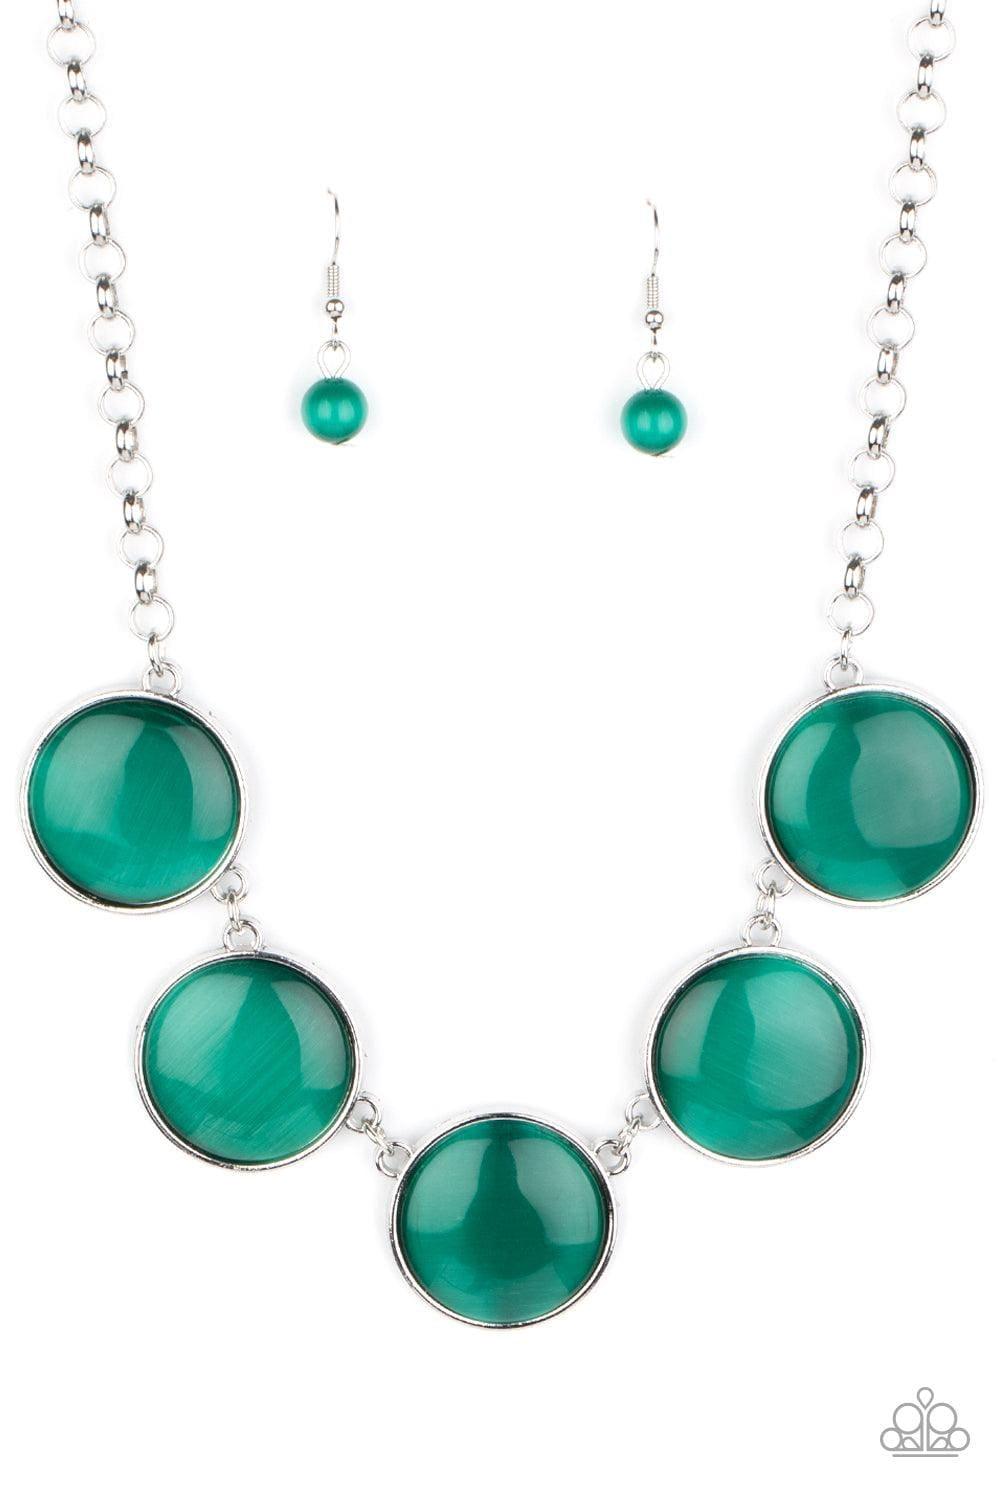 Paparazzi Accessories - Ethereal Escape - Green Necklace - Bling by JessieK